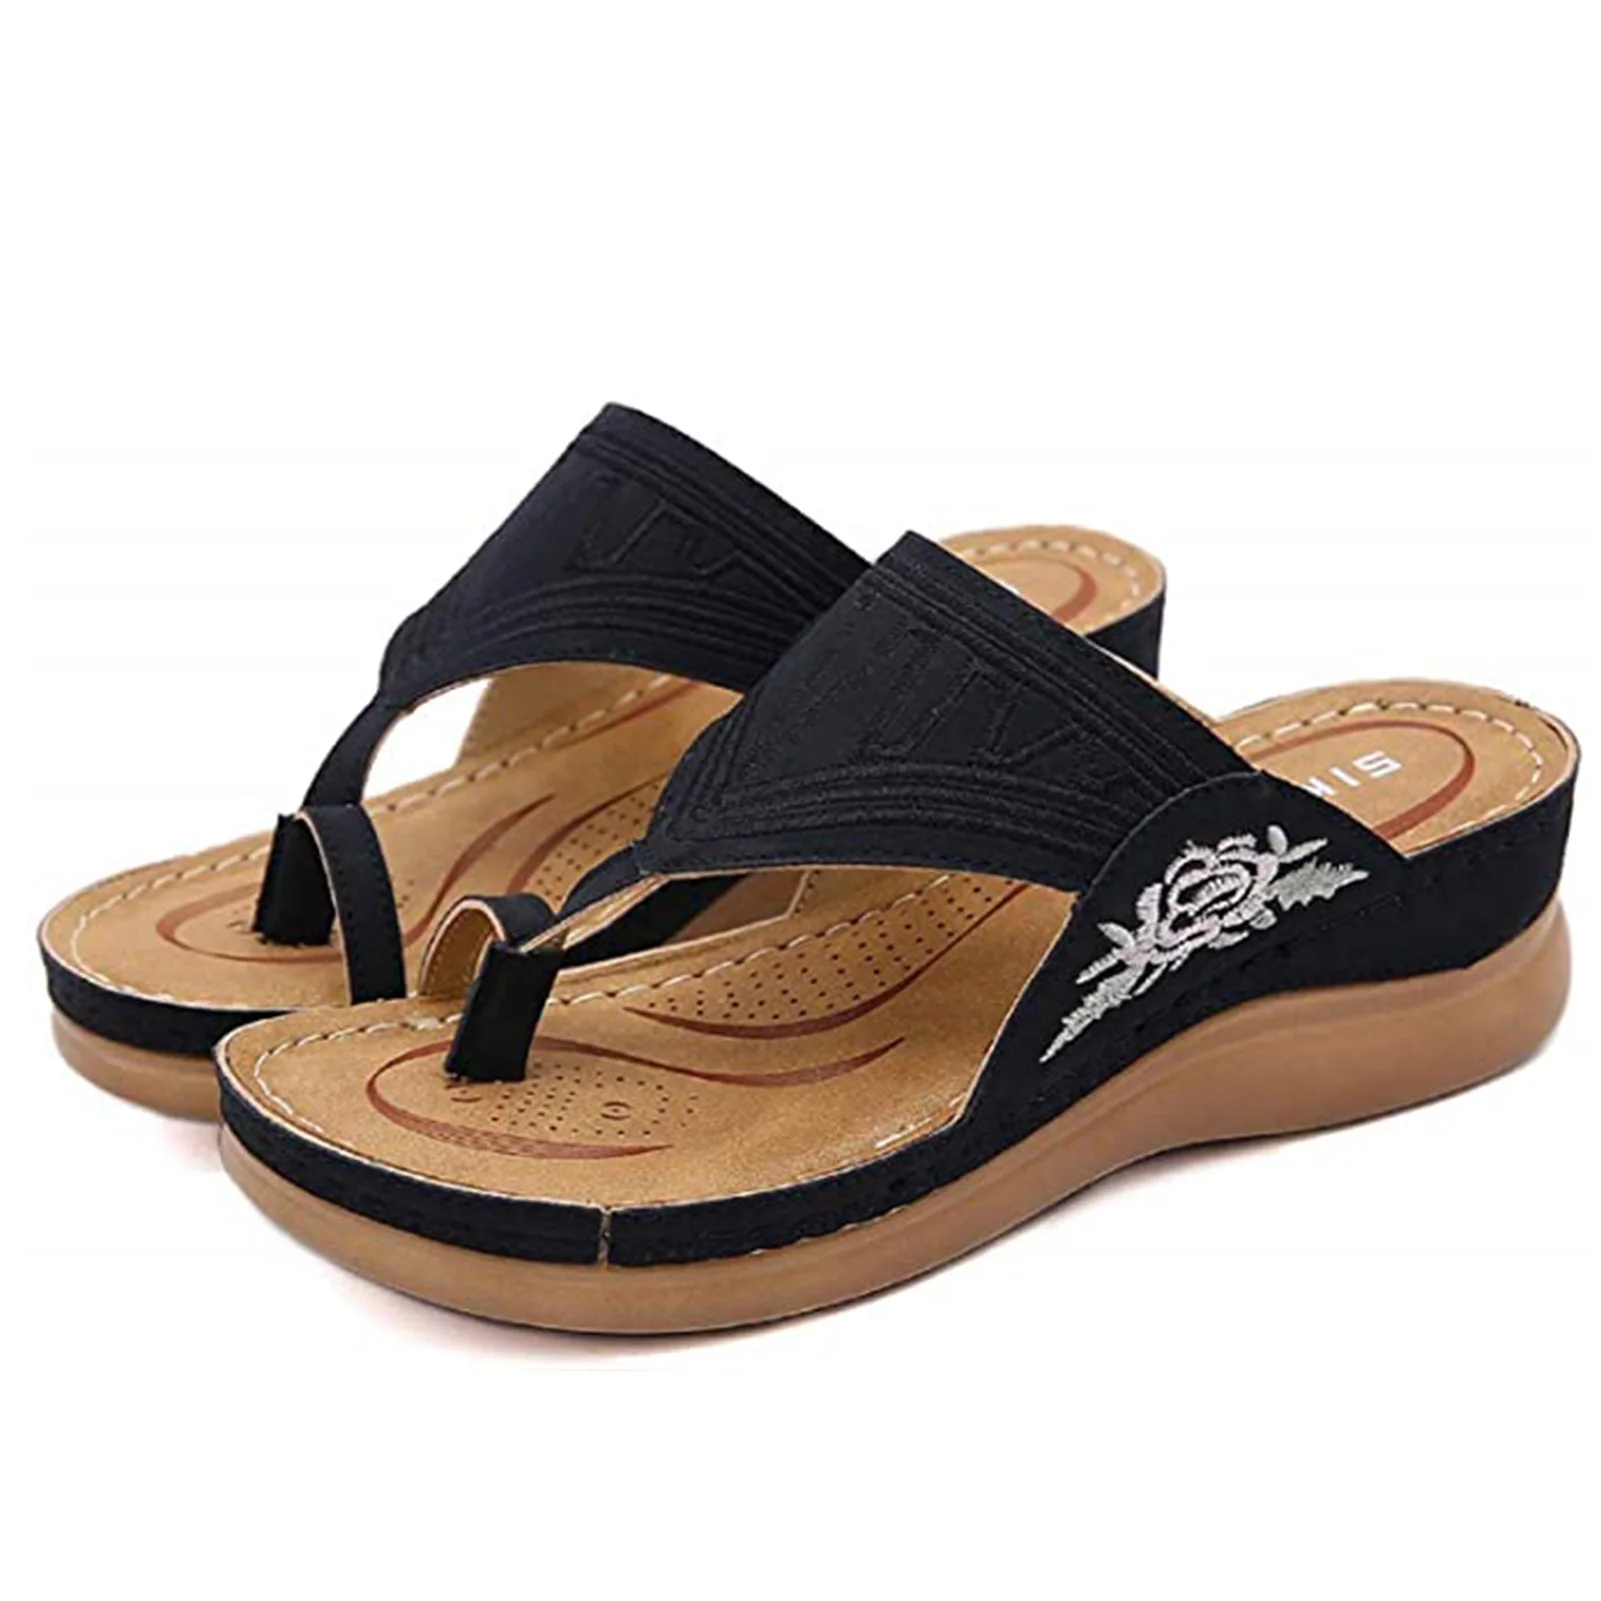 

Embroidery Orthopedic Comfy Flip Flop Sandals For Women 3-arch Support Reduces Pain Outdoor Use